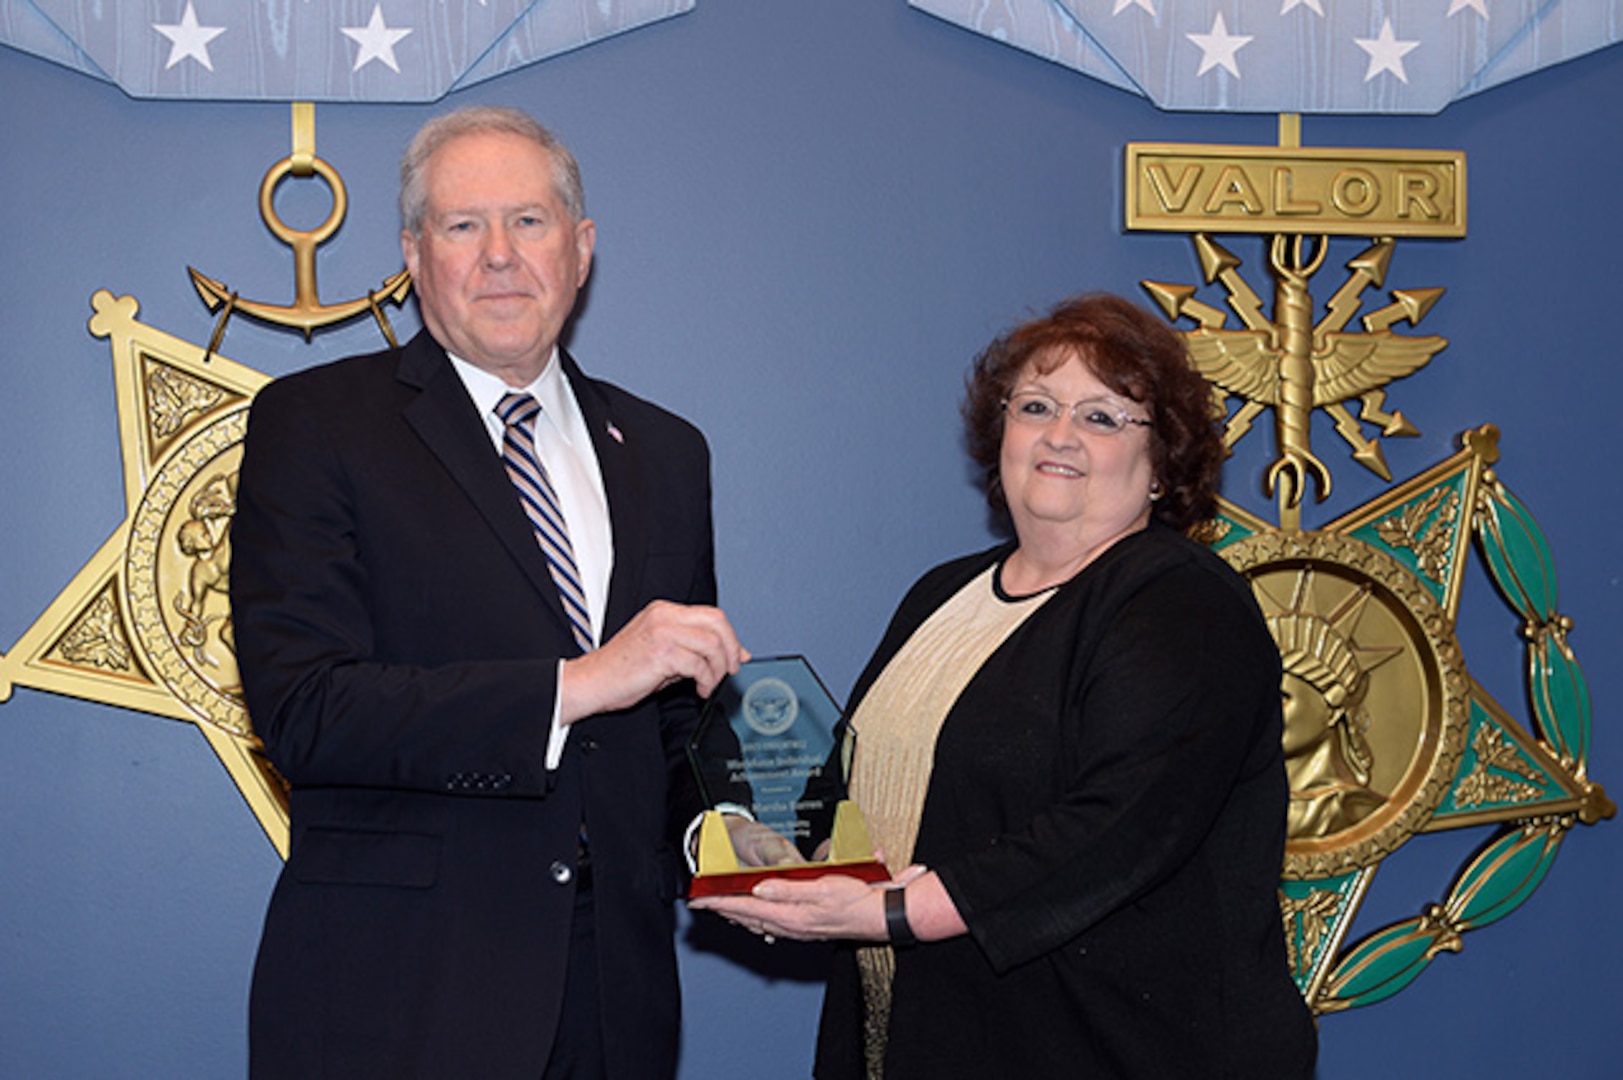 The Under Secretary of Defense for Acquisition, Technology, and Logistics, the Honorable Frank Kendall hosts the 2015 Defense Acquisition Workforce awards at the Pentagon, Arlington Va., Dec 10,2015.DLA Aviation’s Supplier Operations Directorate’s Technical Quality Supervisor Marsha Barron receives the Individual Achievement Award in Production, Quality, and Manufacturing.(U.S. Army photo by Mr. Leroy Council, AMVID/Released)